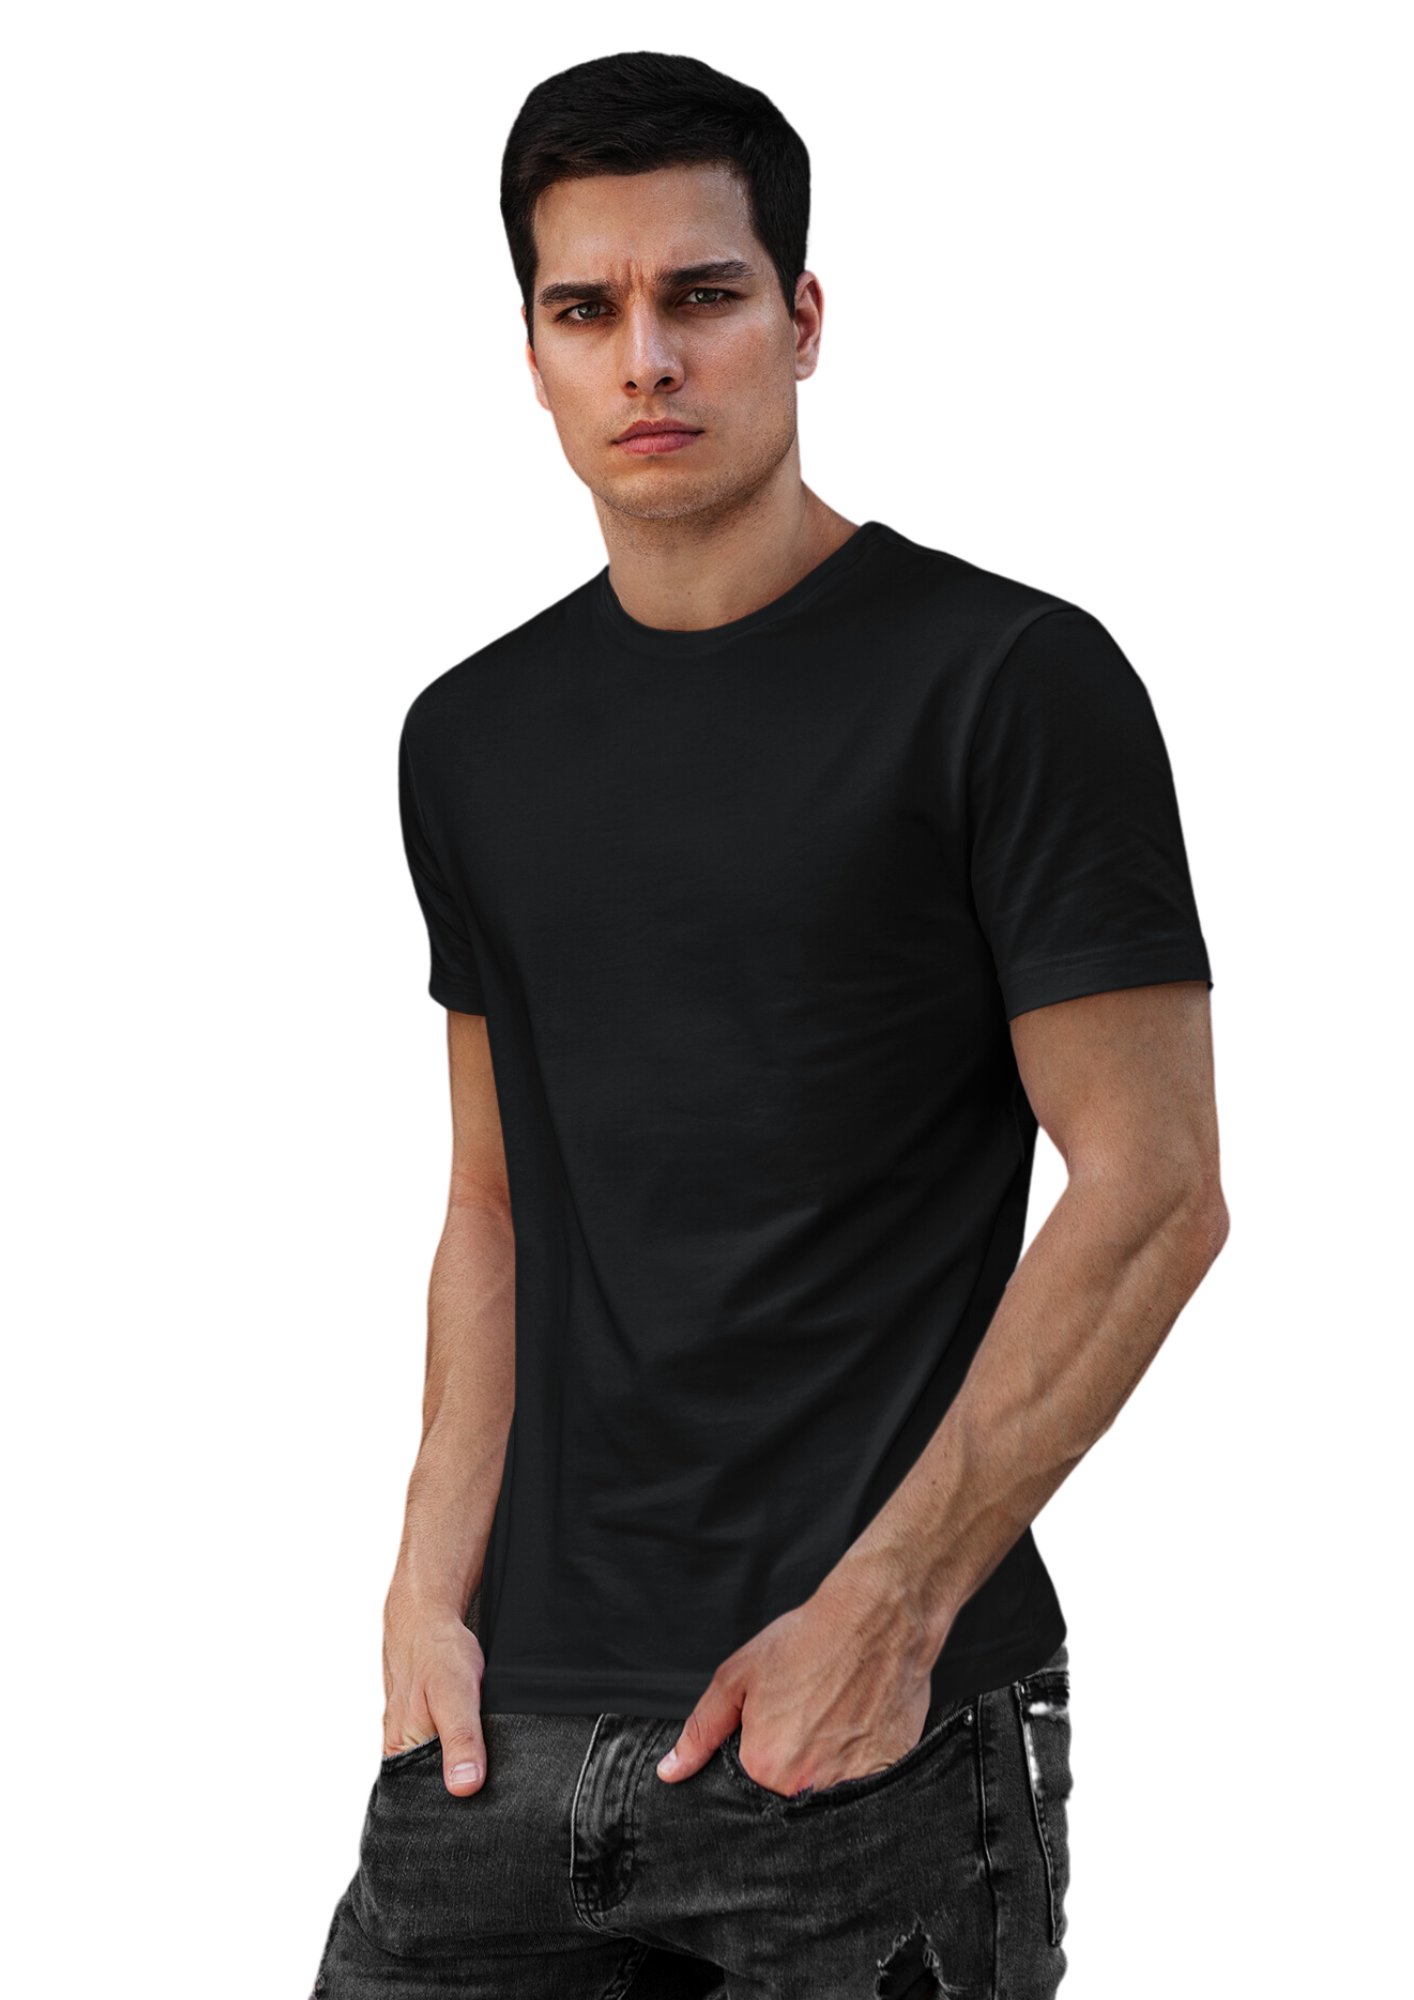 100% Compacted Combed Cotton Black, Black, White 3 T-shirts